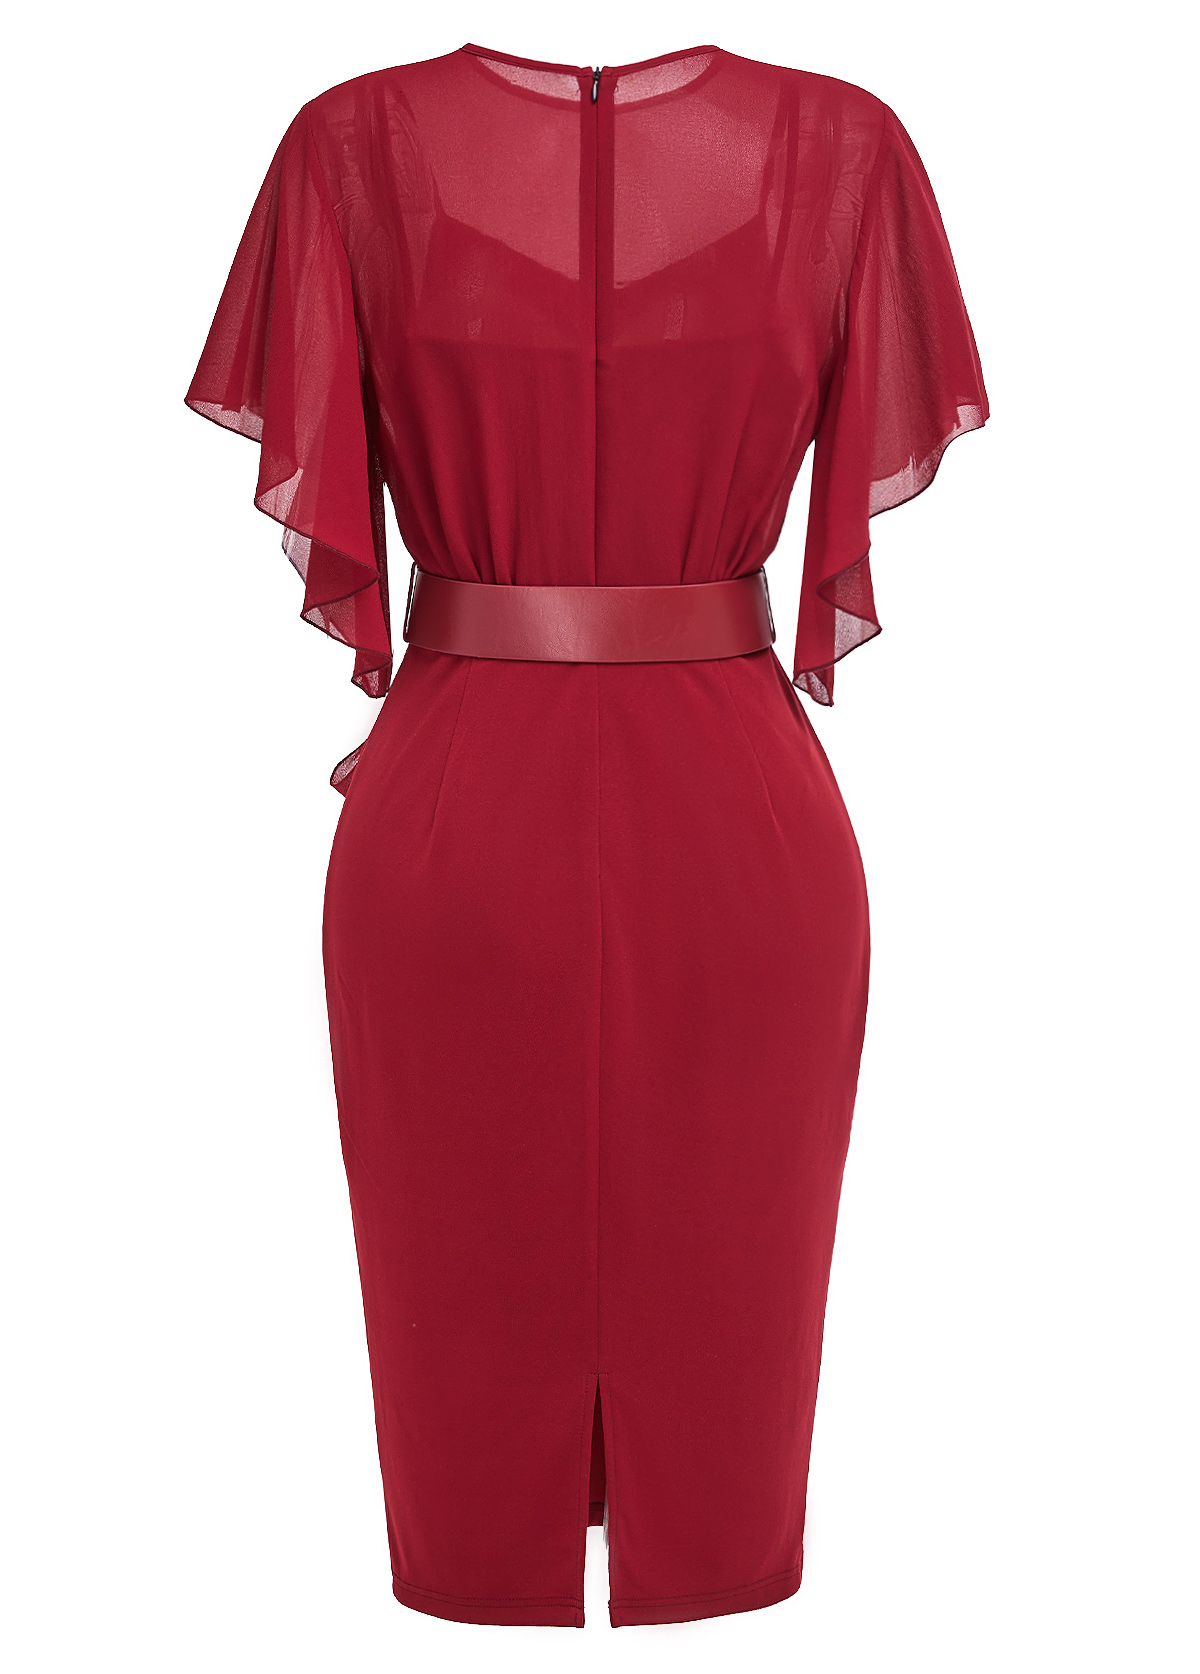 Wine Red Tie Belted Short Sleeve Bodycon Dress